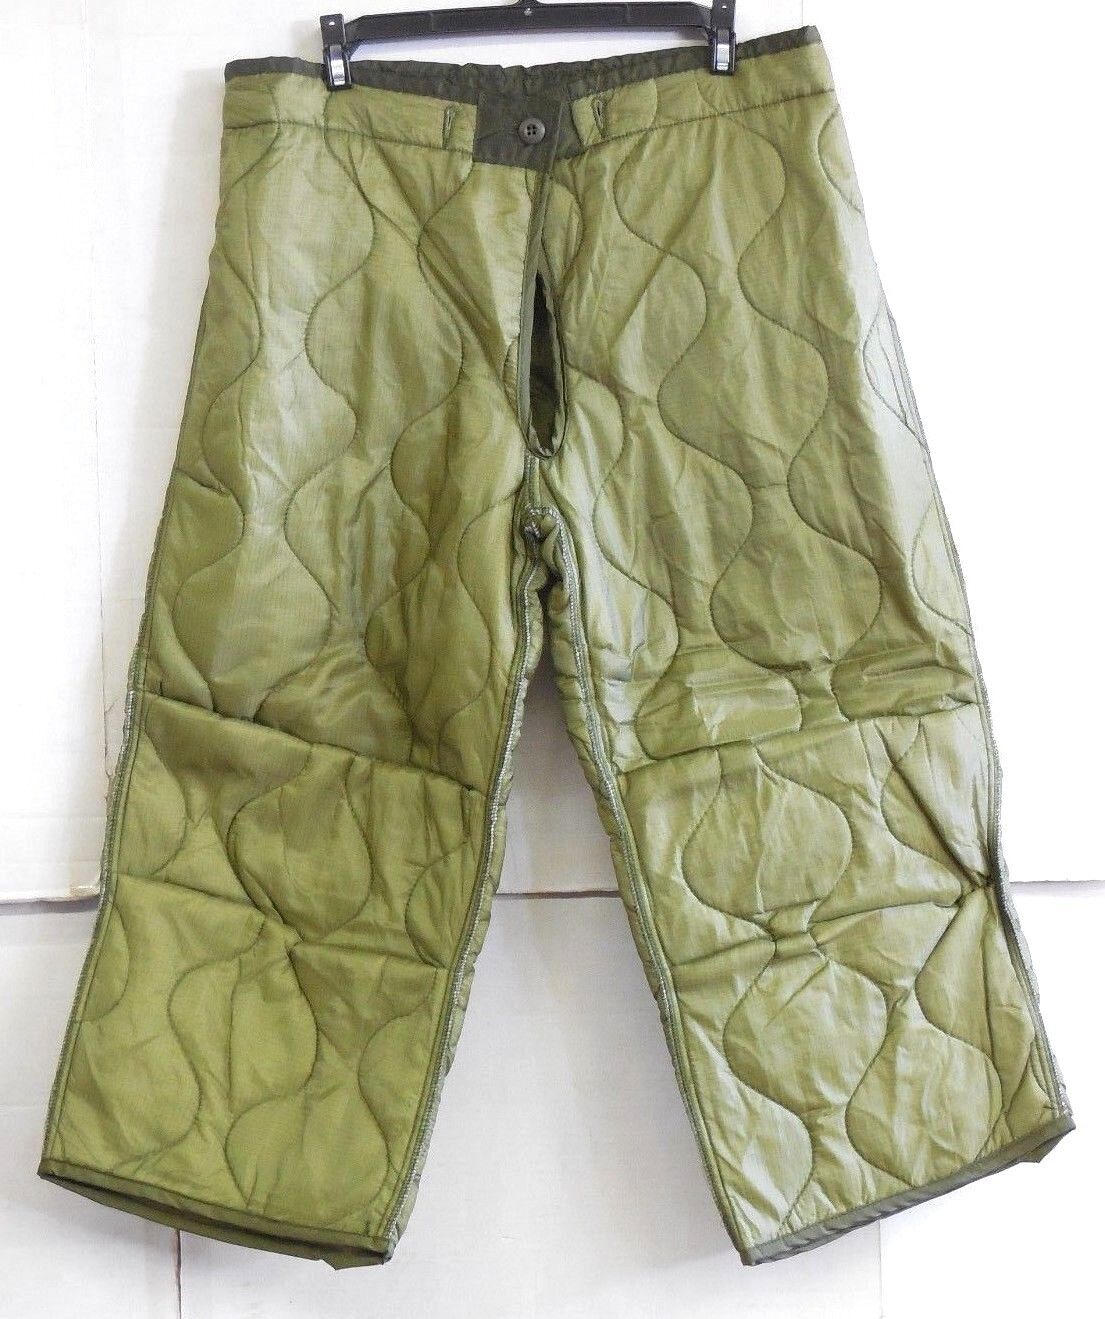 UNISSUED US MILITARY M-65 COLD WEATHER QUILTED FIELD PANTS LINER (MEDIUM LONG)